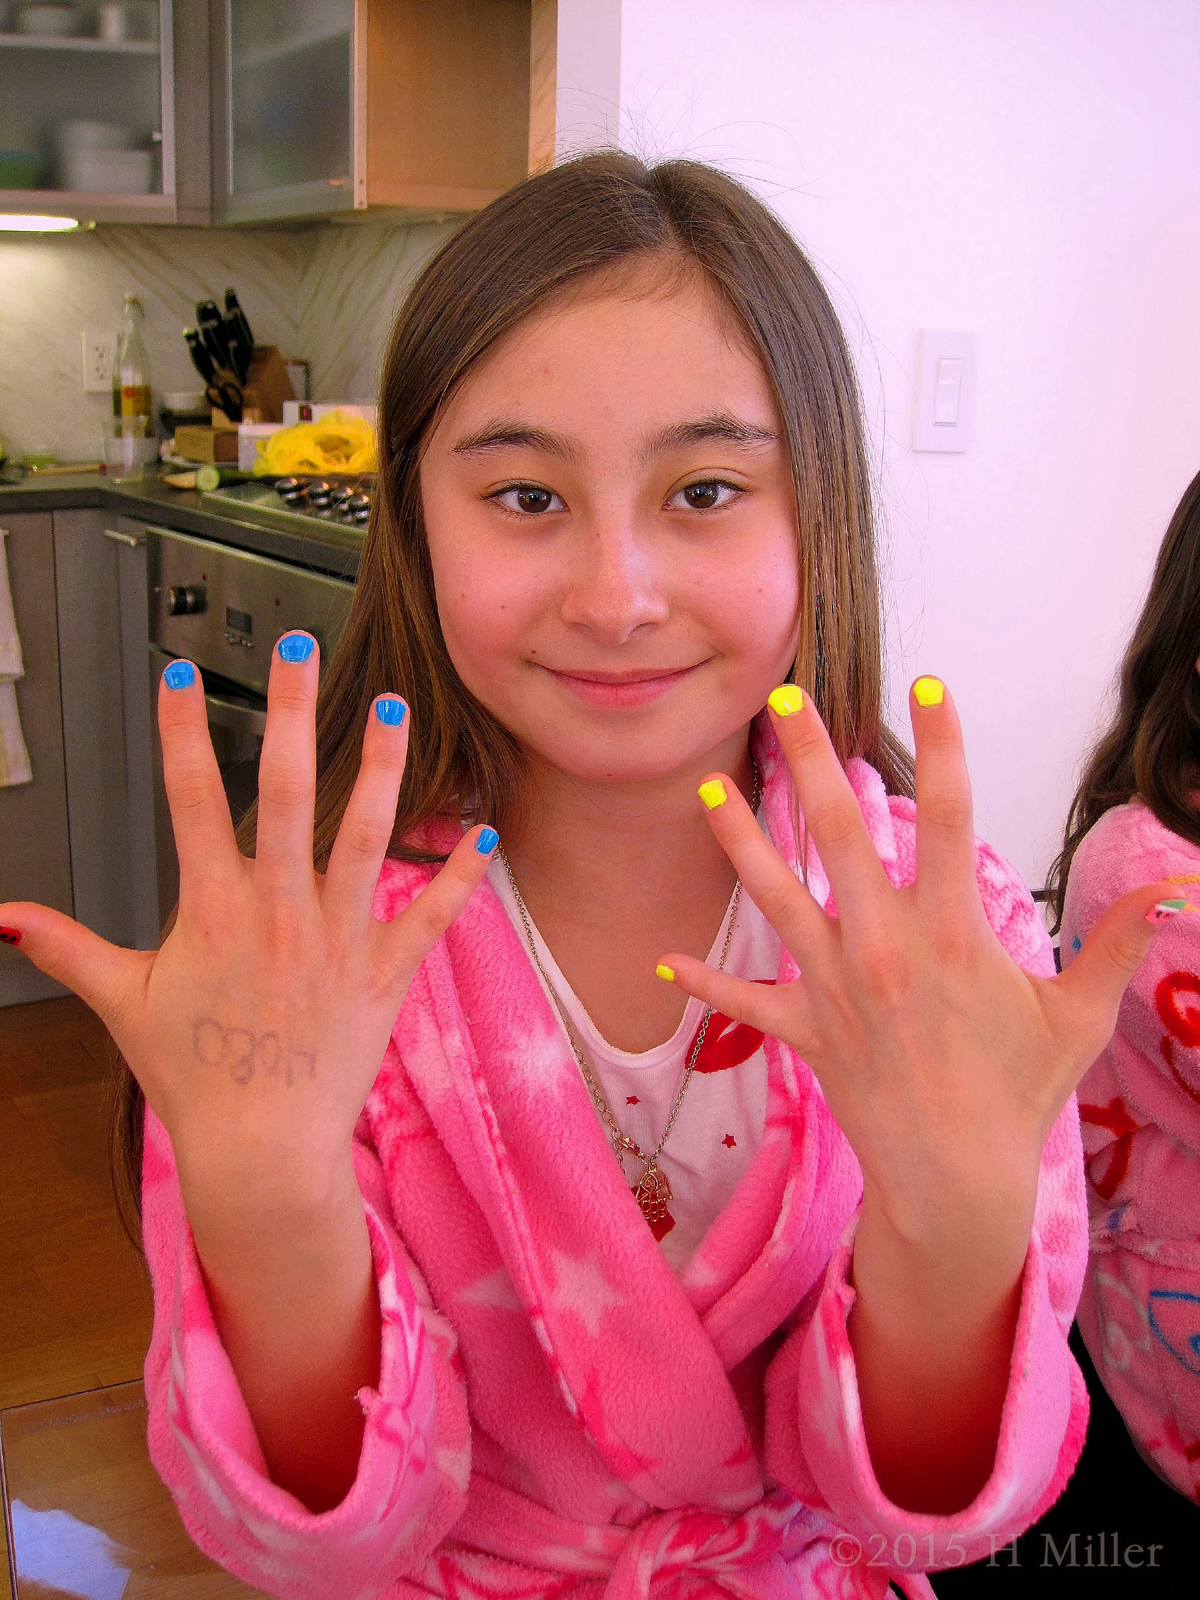 The Birthday Girl Shows Her New Mani. 